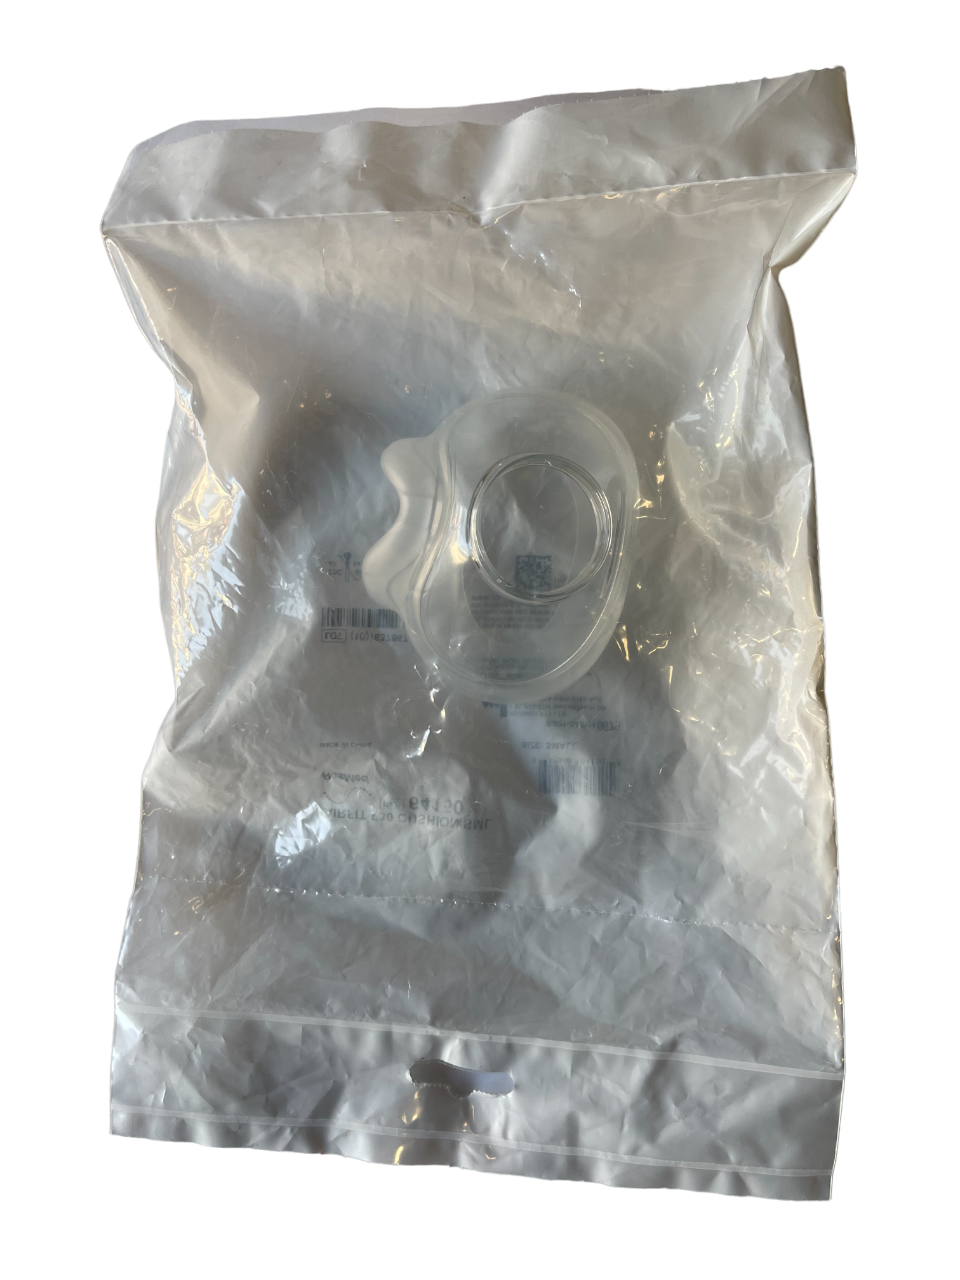 ResMed AirFit F30 Full Face CPAP Mask Cushion Seal - No Insurance Medical Supplies